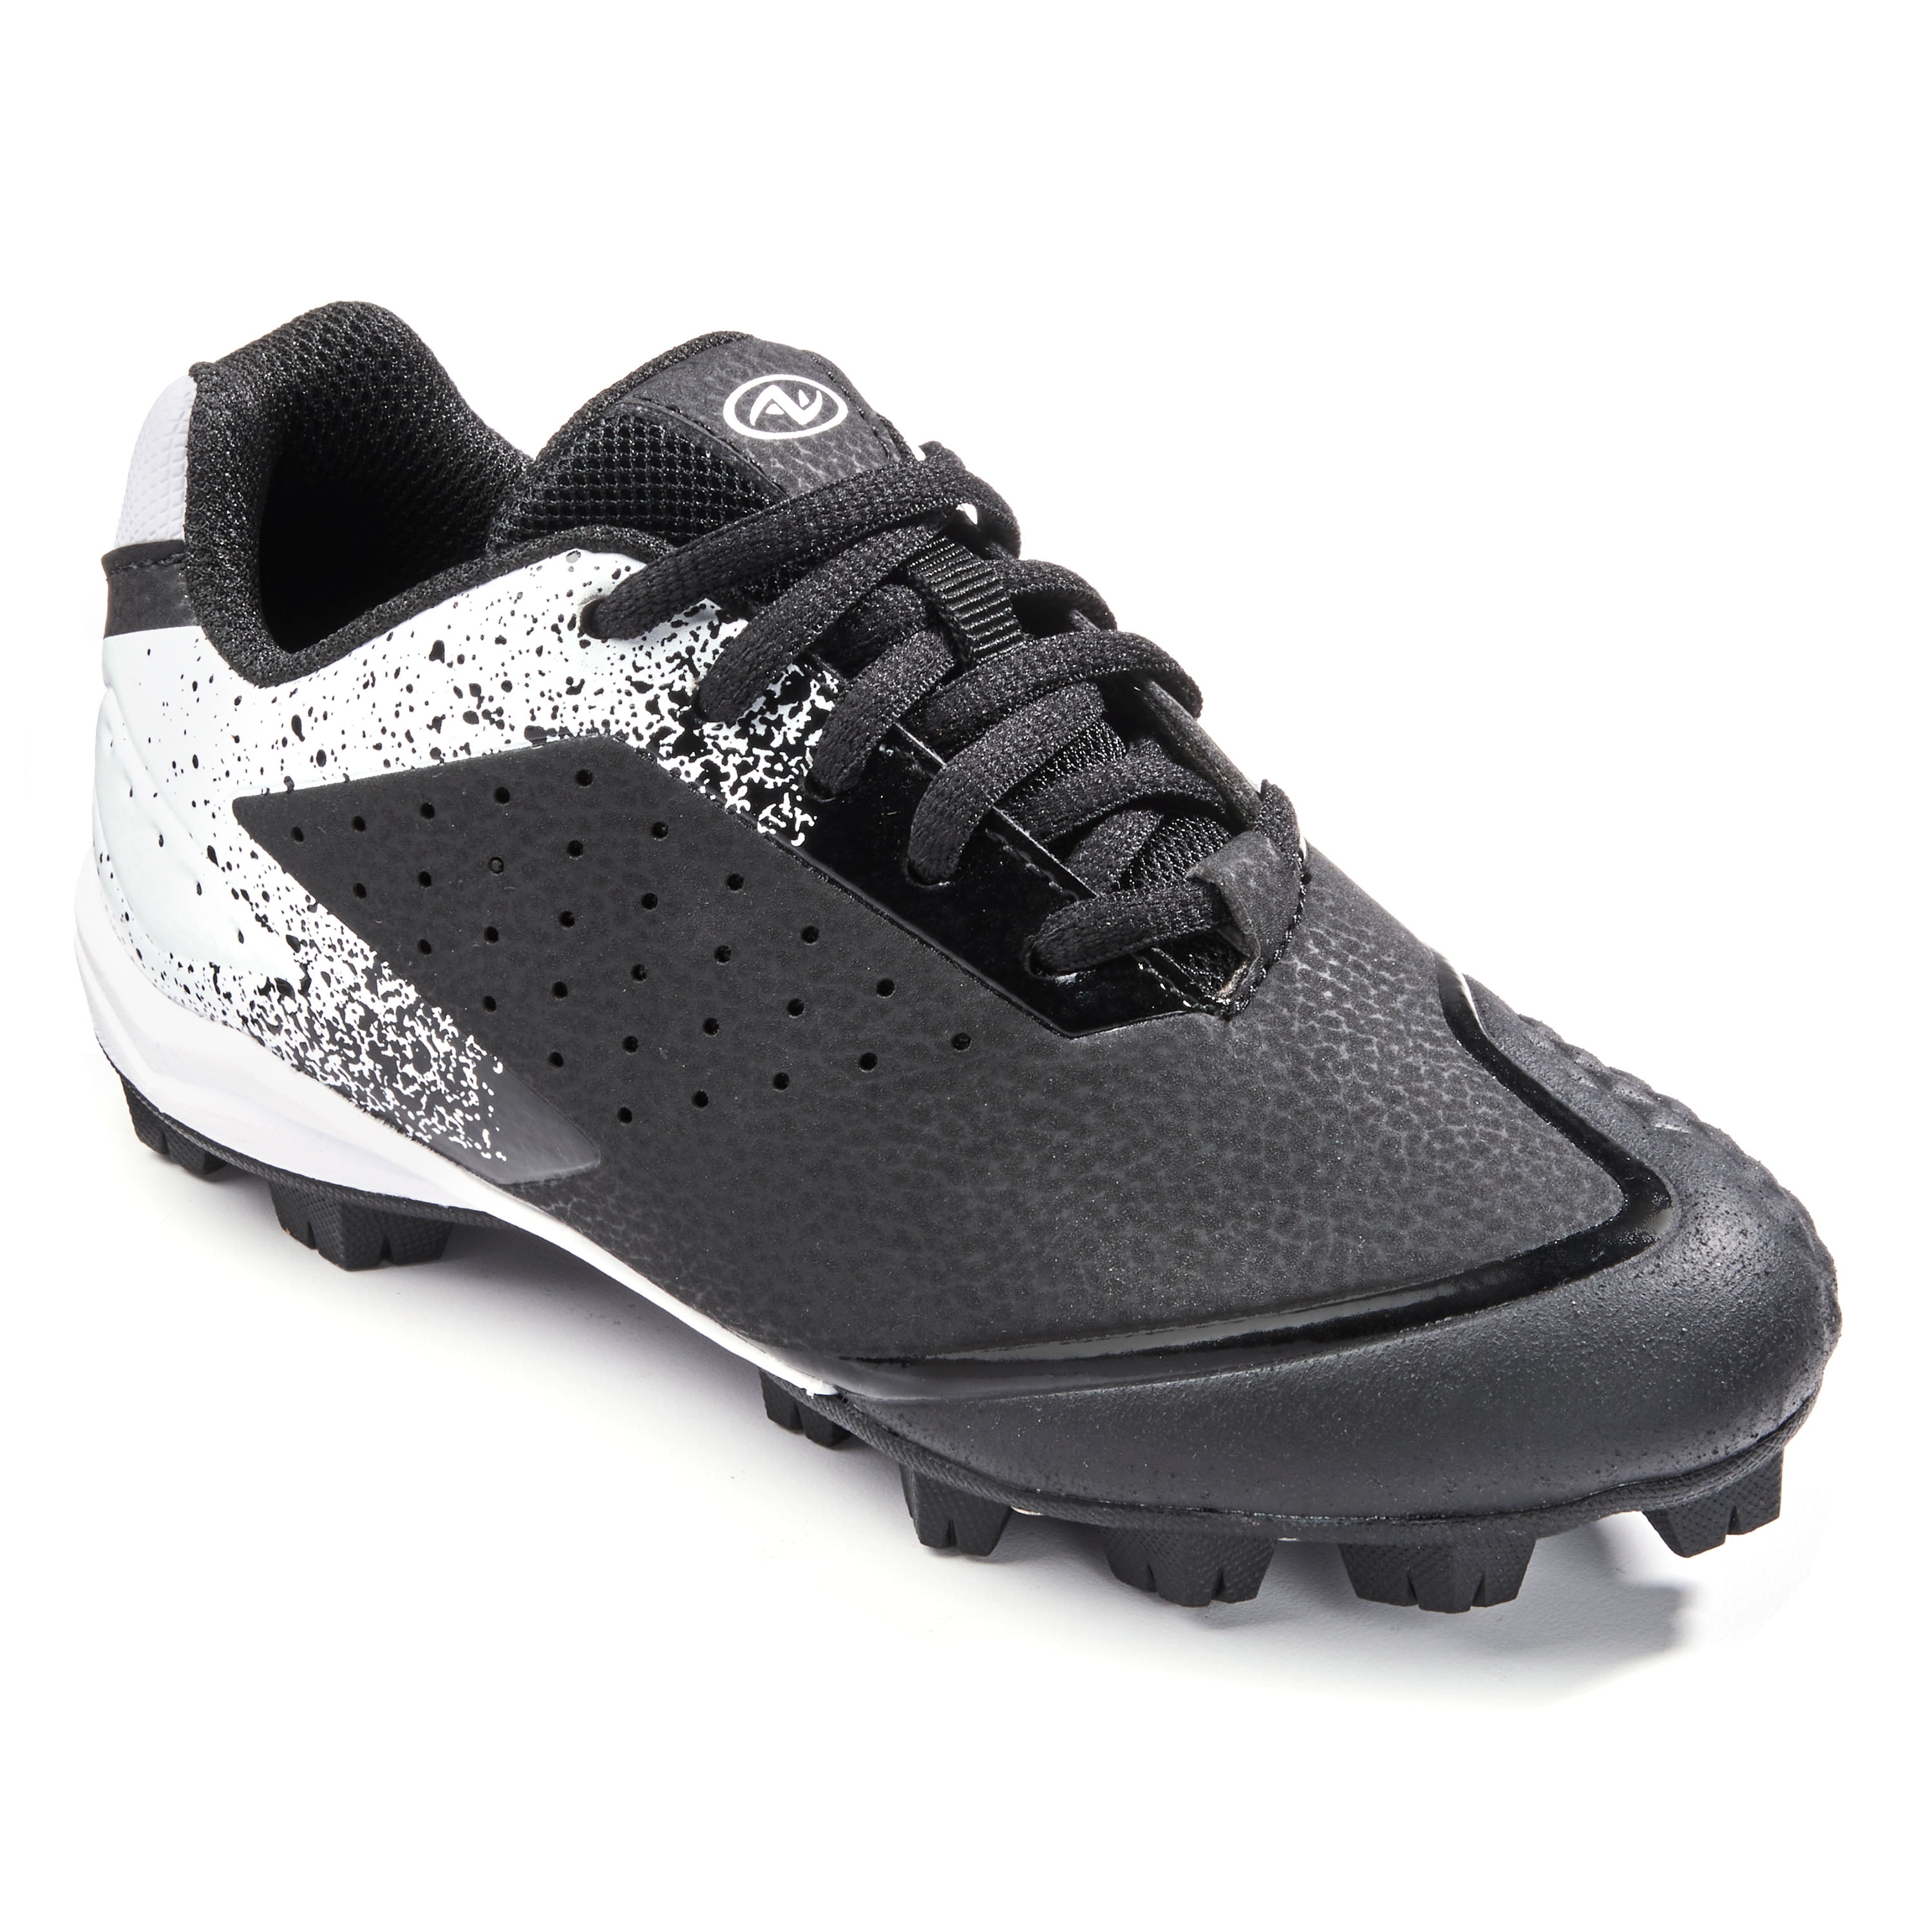 2251003 Athletic Works Soccer Football Cleats Youth Boys 4 Black White for sale online 